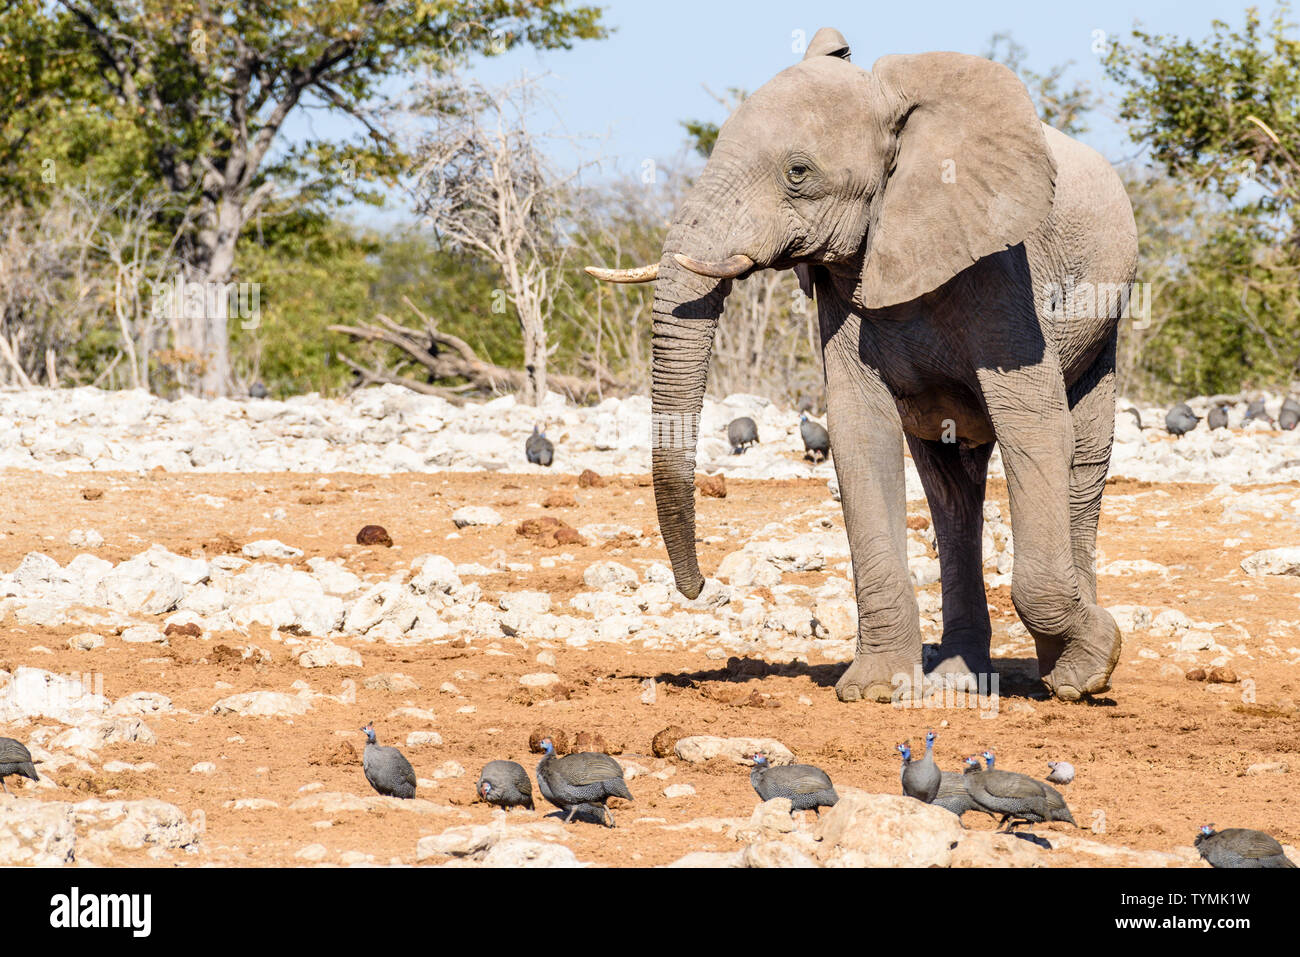 African elephants at a water hole in Namibia.  Elephants in Etosha suffer from a lack of phosphor, making their tusks slow growing and brittle.  They Stock Photo